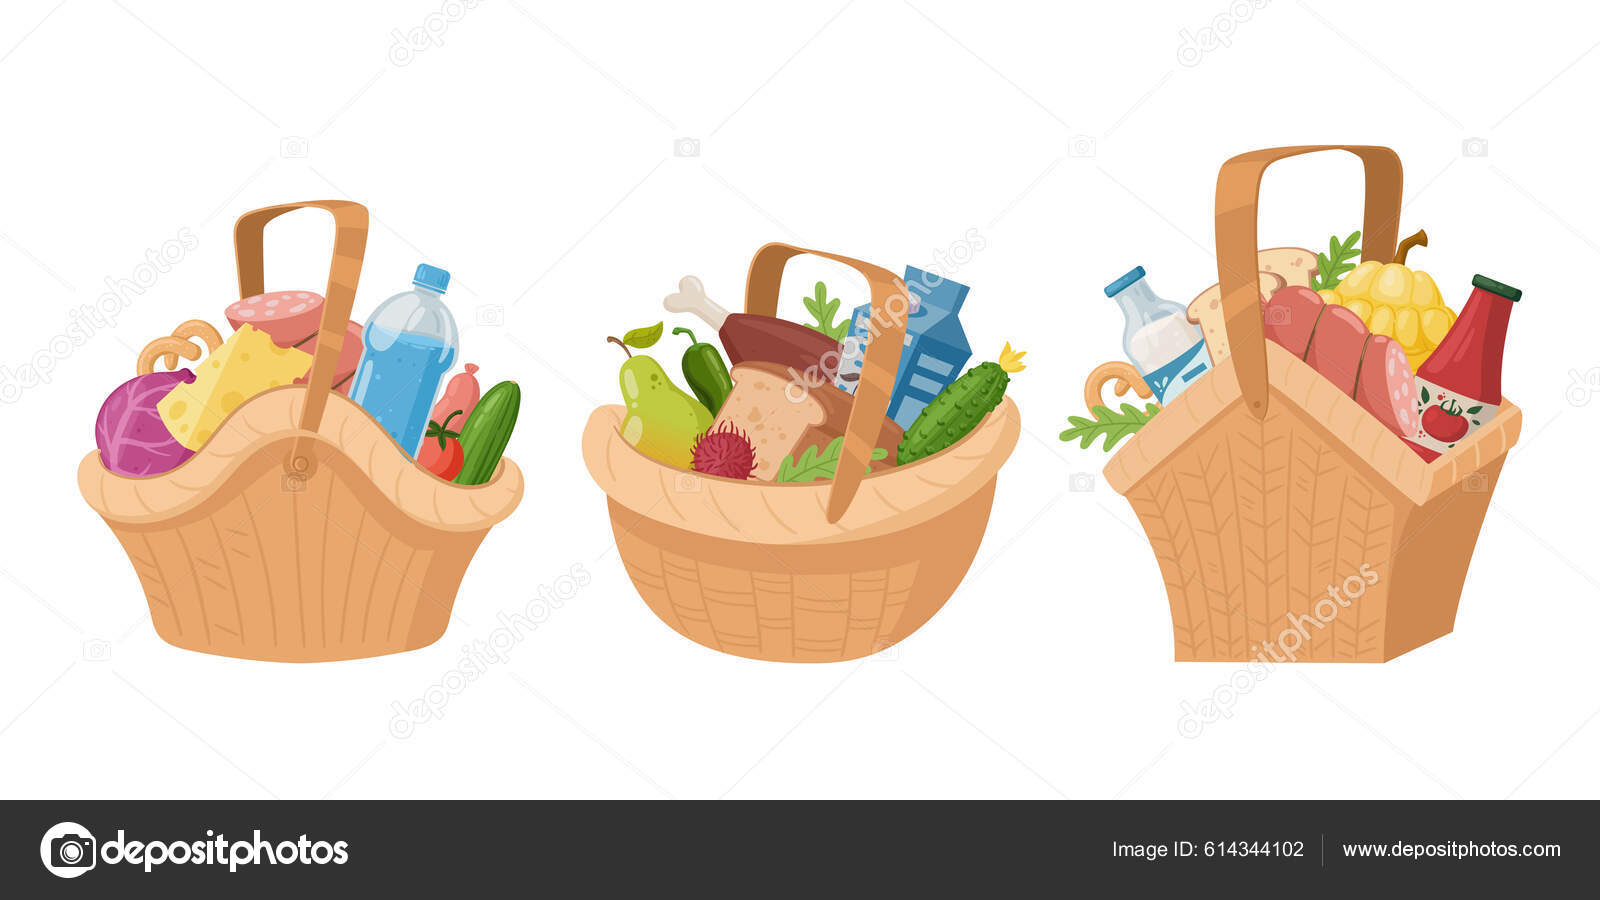 Picnic baskets. Wicker containers with fruit, vegetables, bread